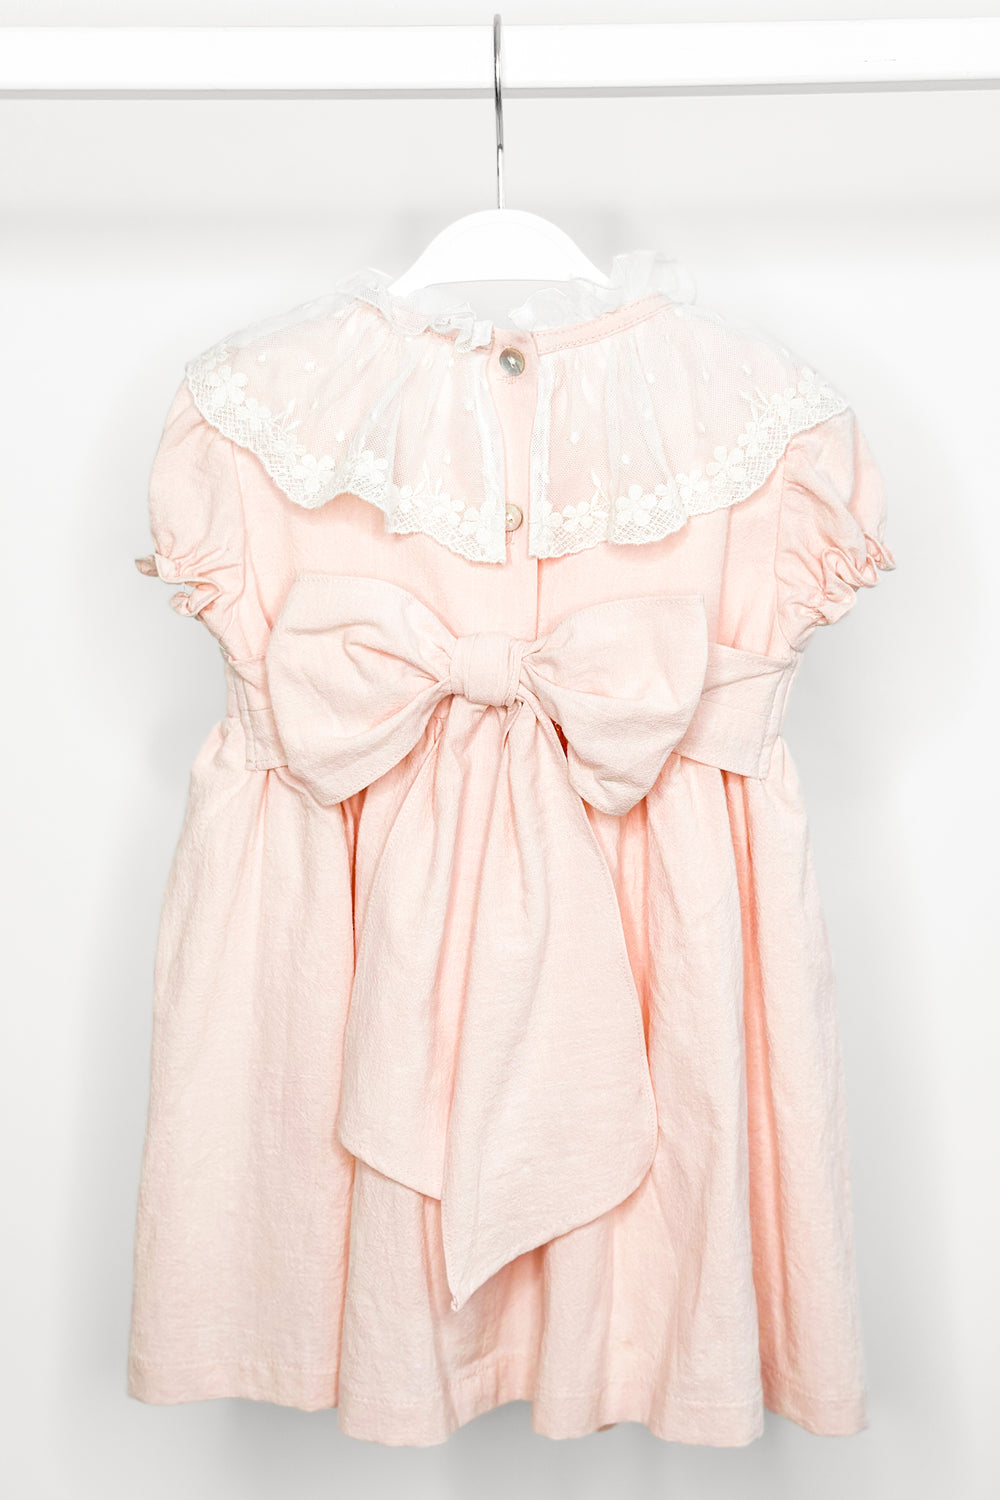 Fofettes "Arabella" Pink Lace Collar Dress | Millie and John